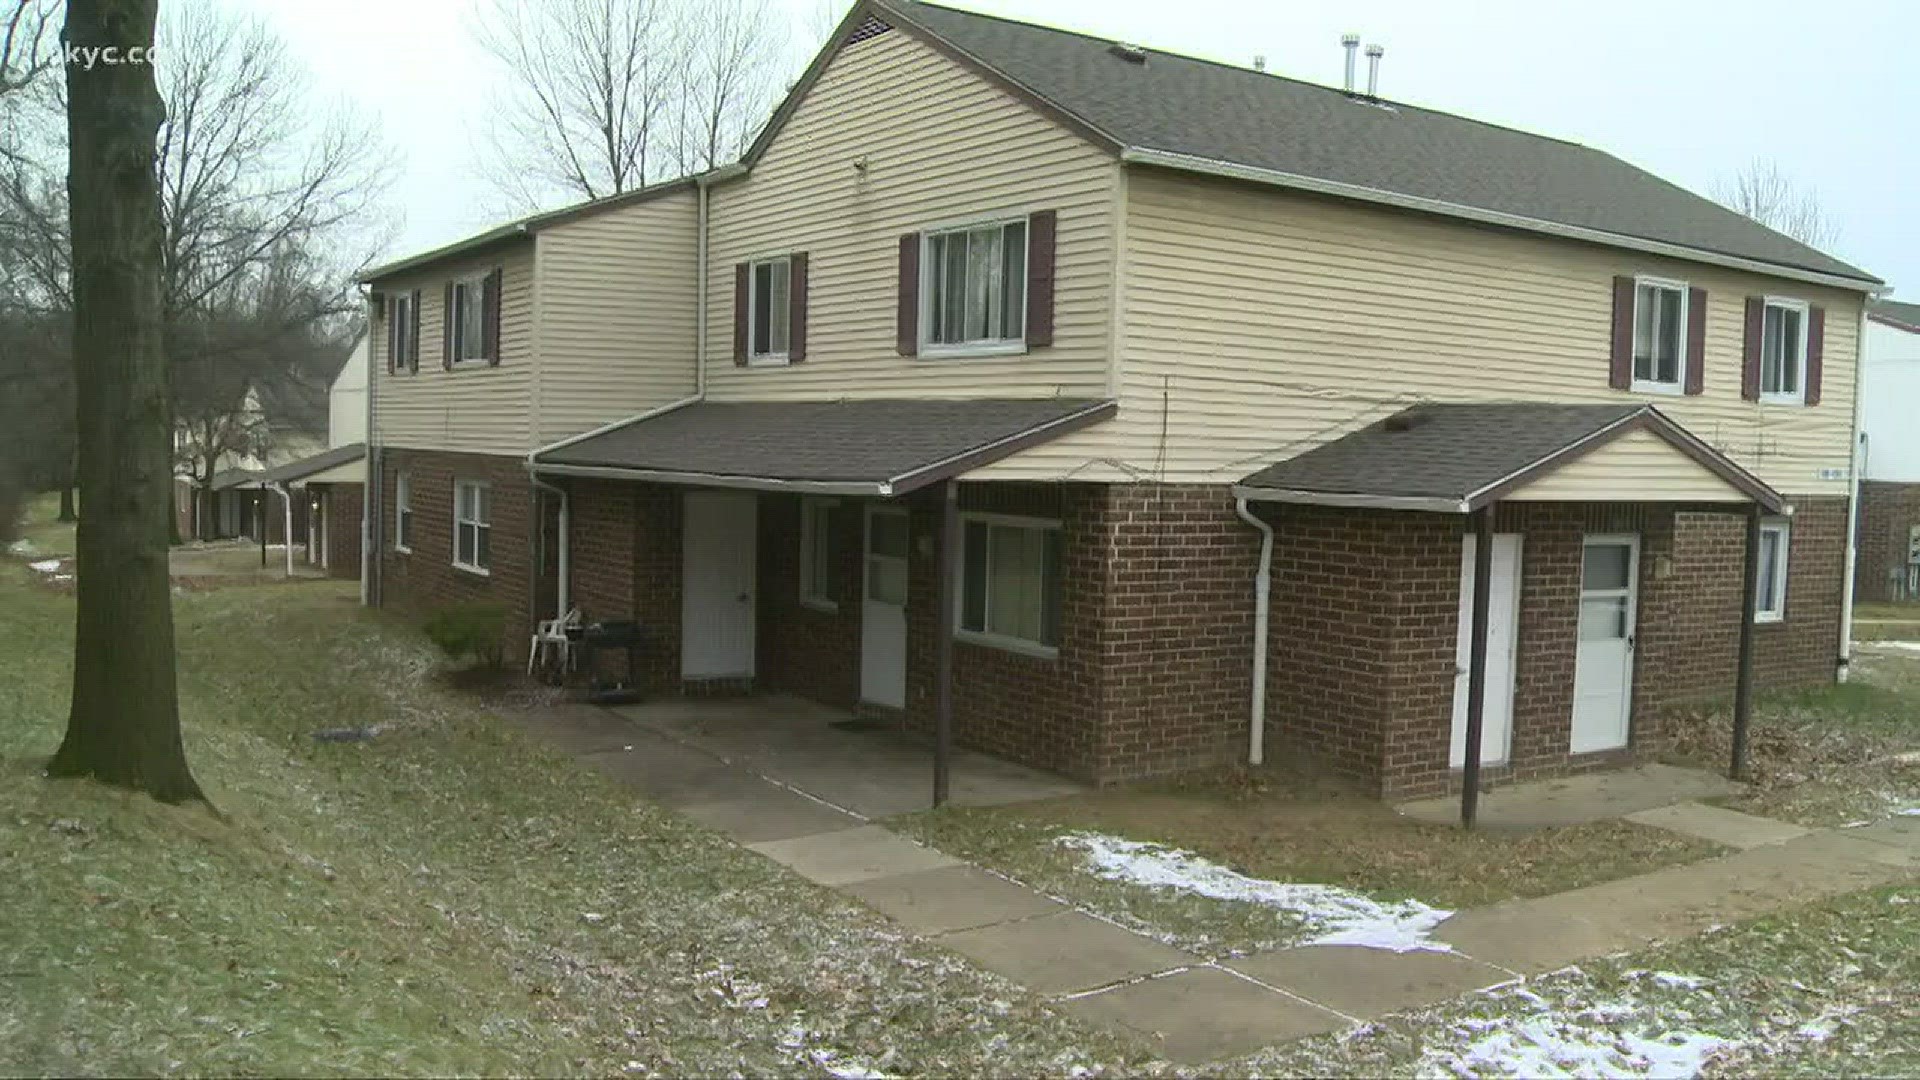 The name of Akron toddler found frozen to death on porch released